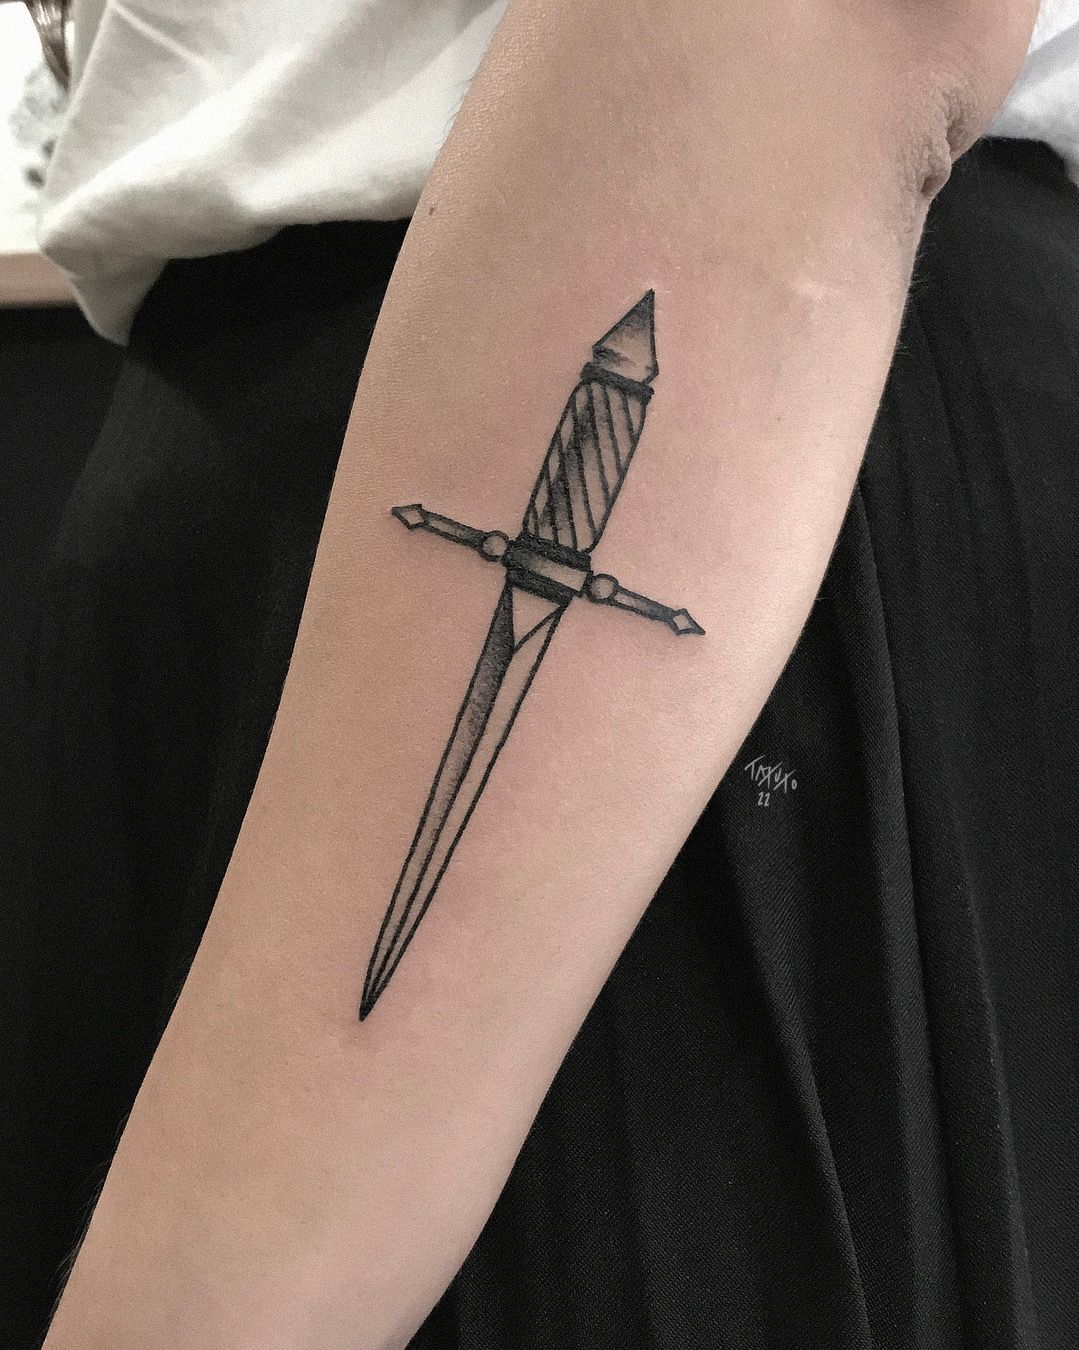 Fine line rose and dagger tattoo on the forearm.